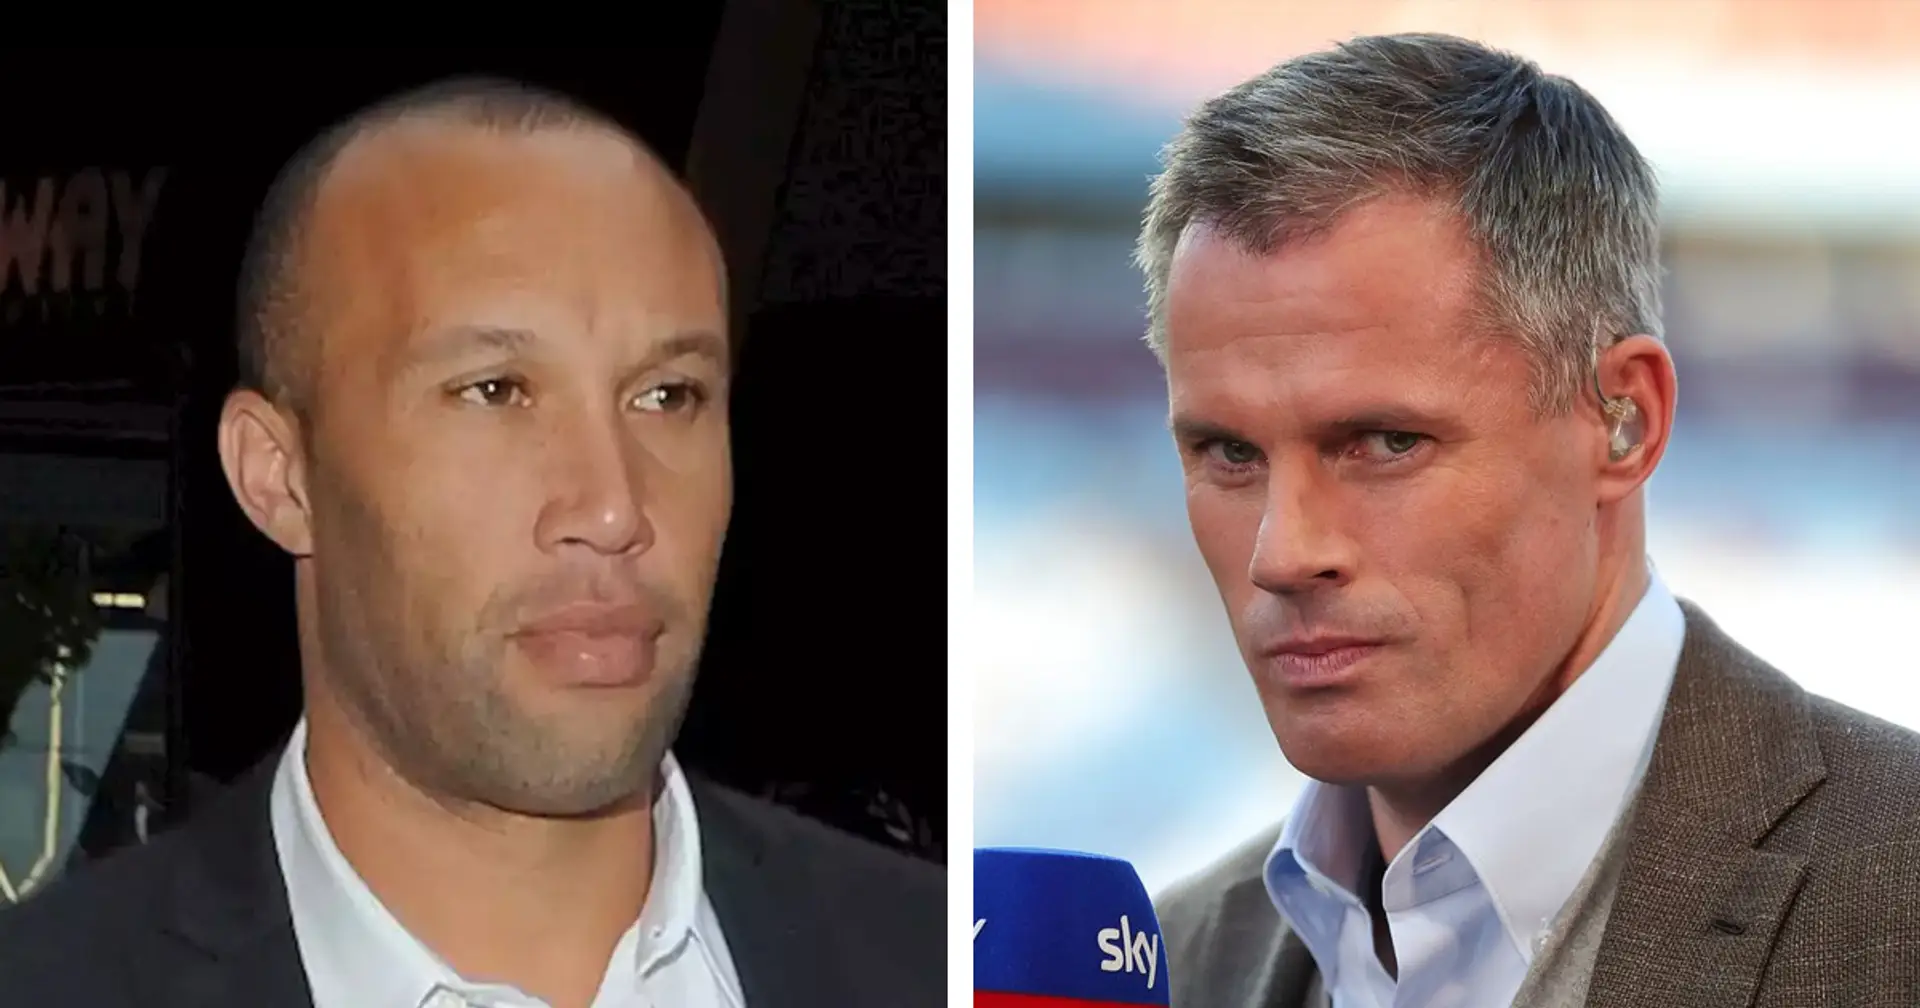 'He's now spitting at footballers': Silvestre aims dig at Carragher following Luiz criticism